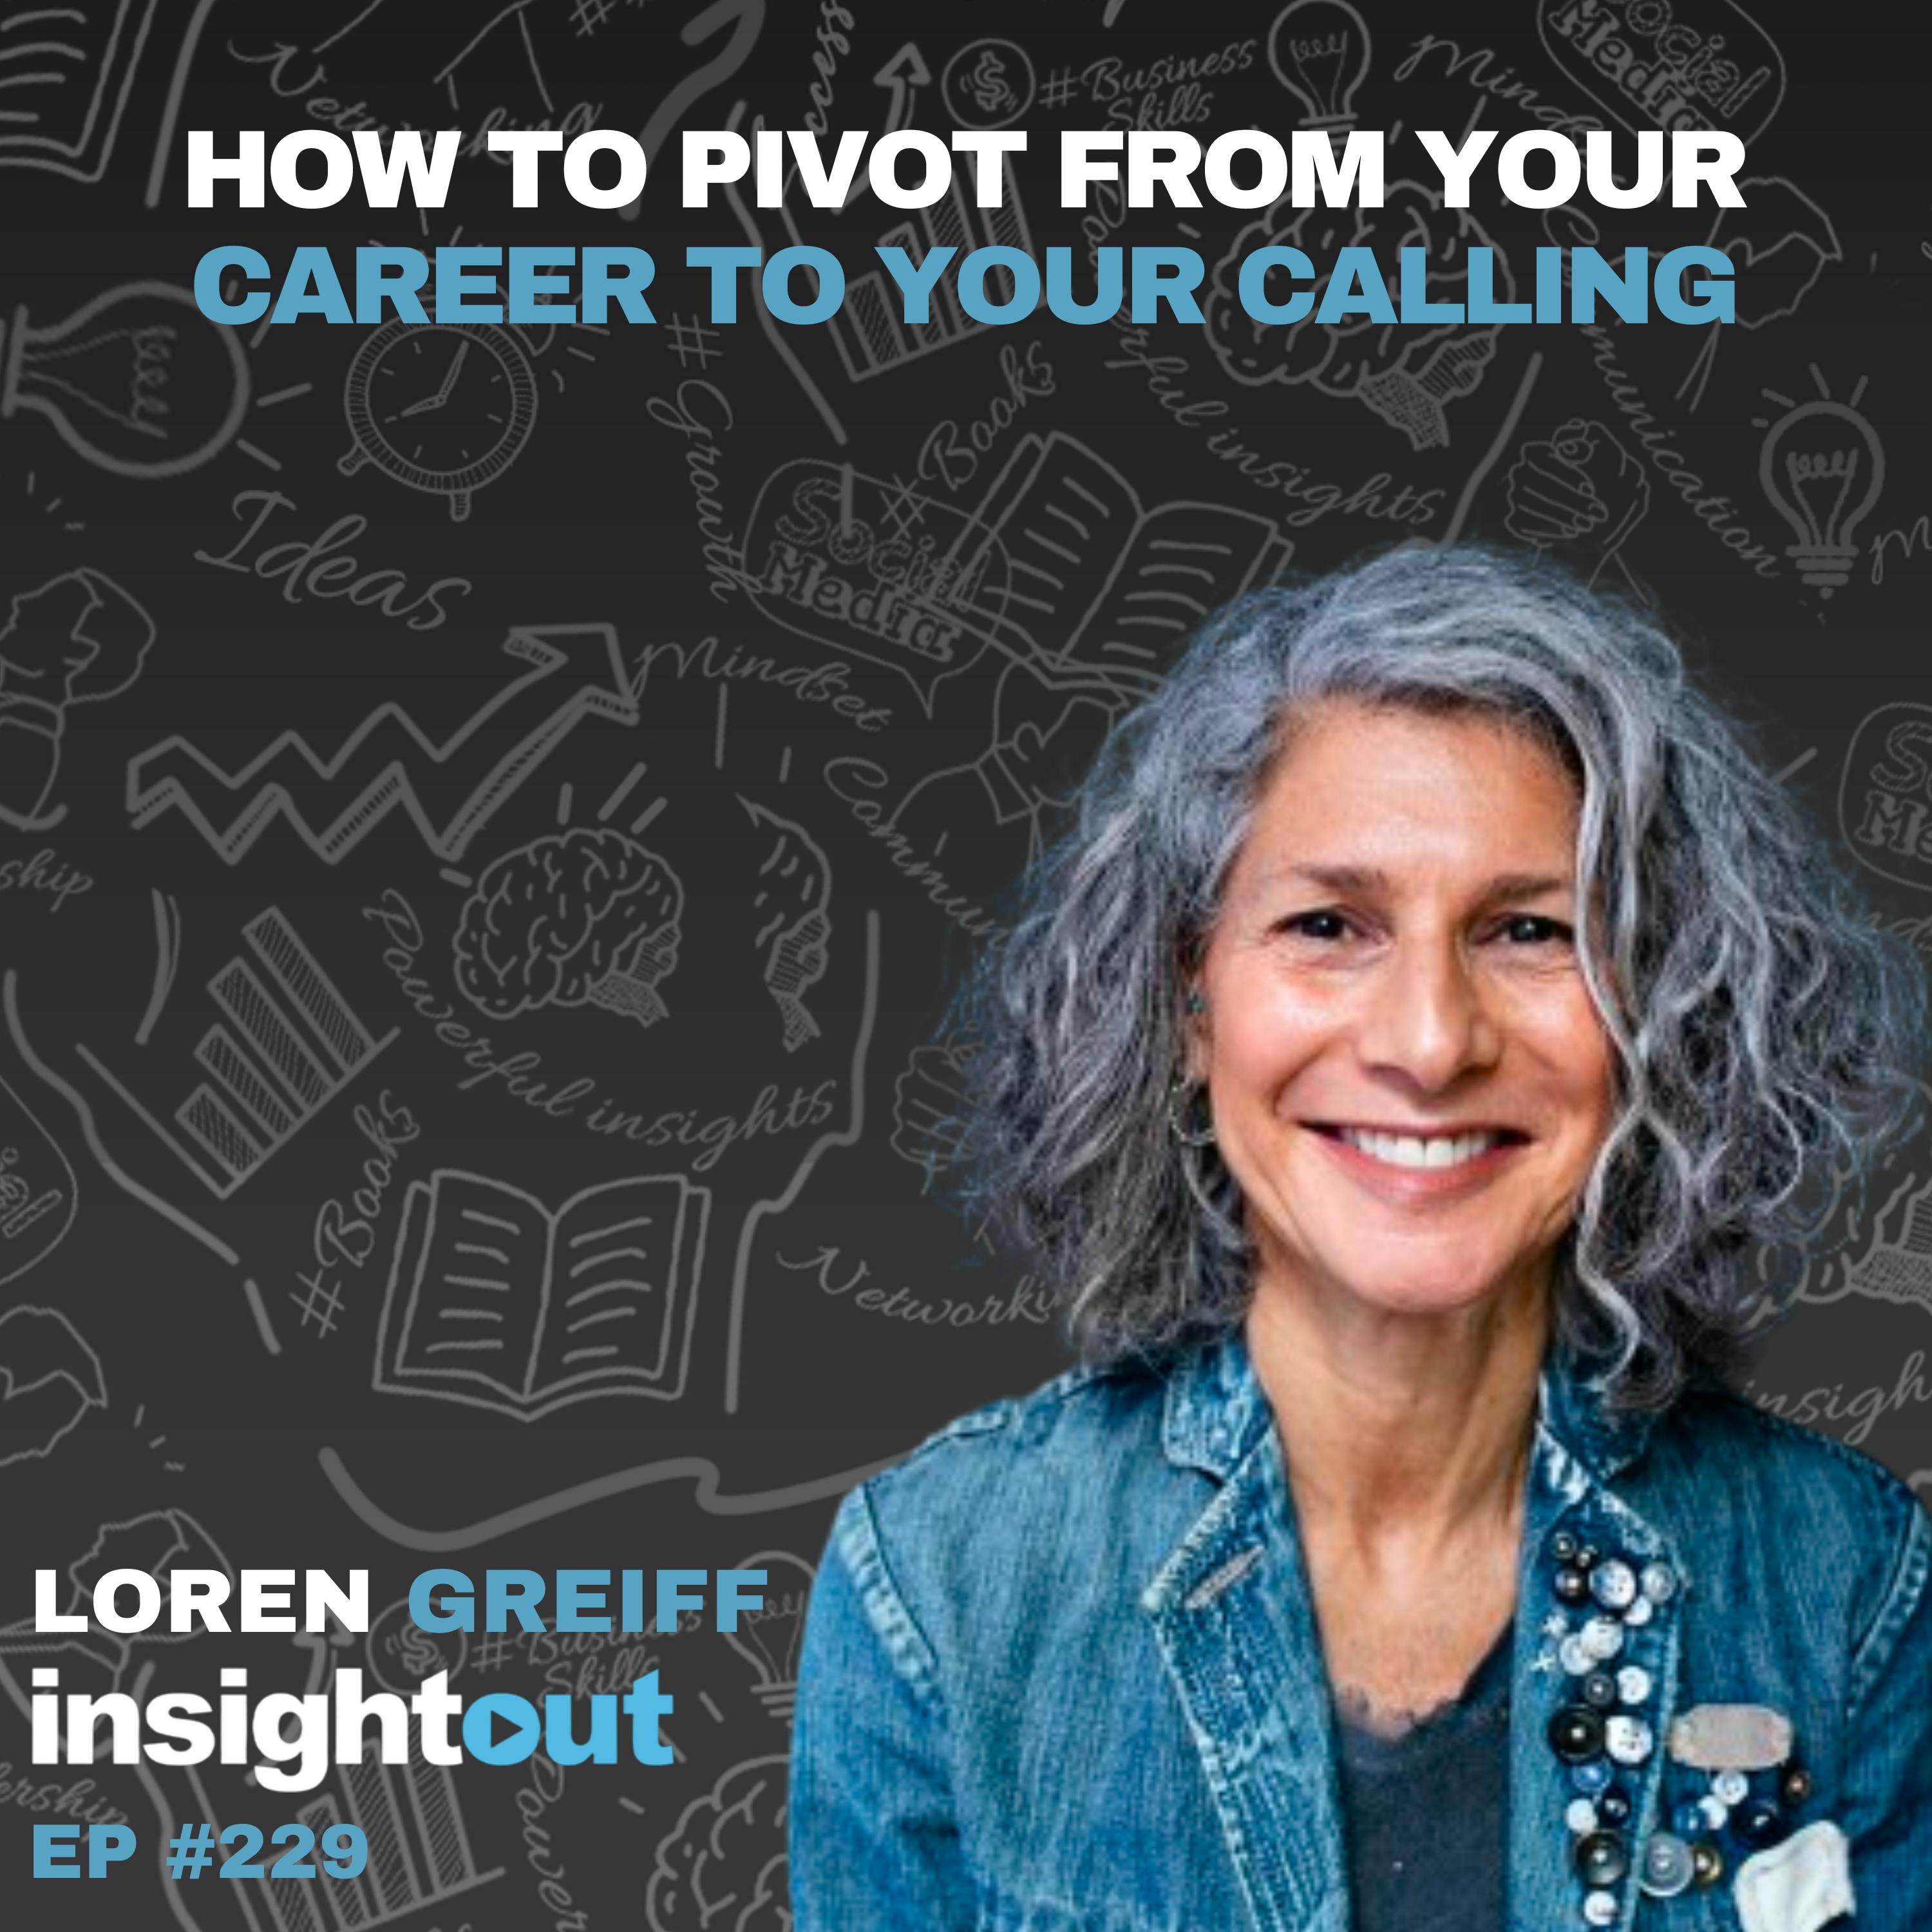 How to Pivot from Your Career to Your Calling with Loren Greiff